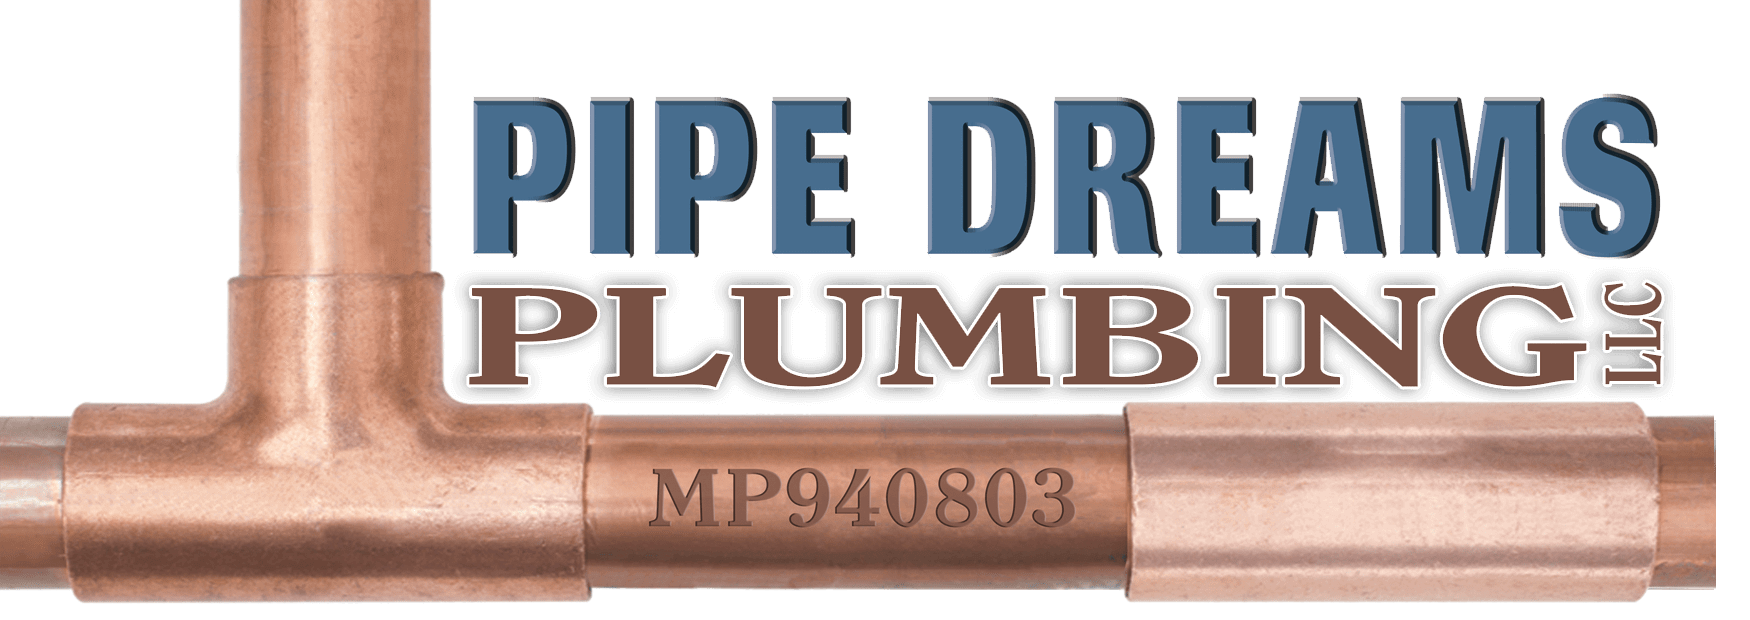 Pipe Dreams Plumbing LLC | We do it right, every time, on time!